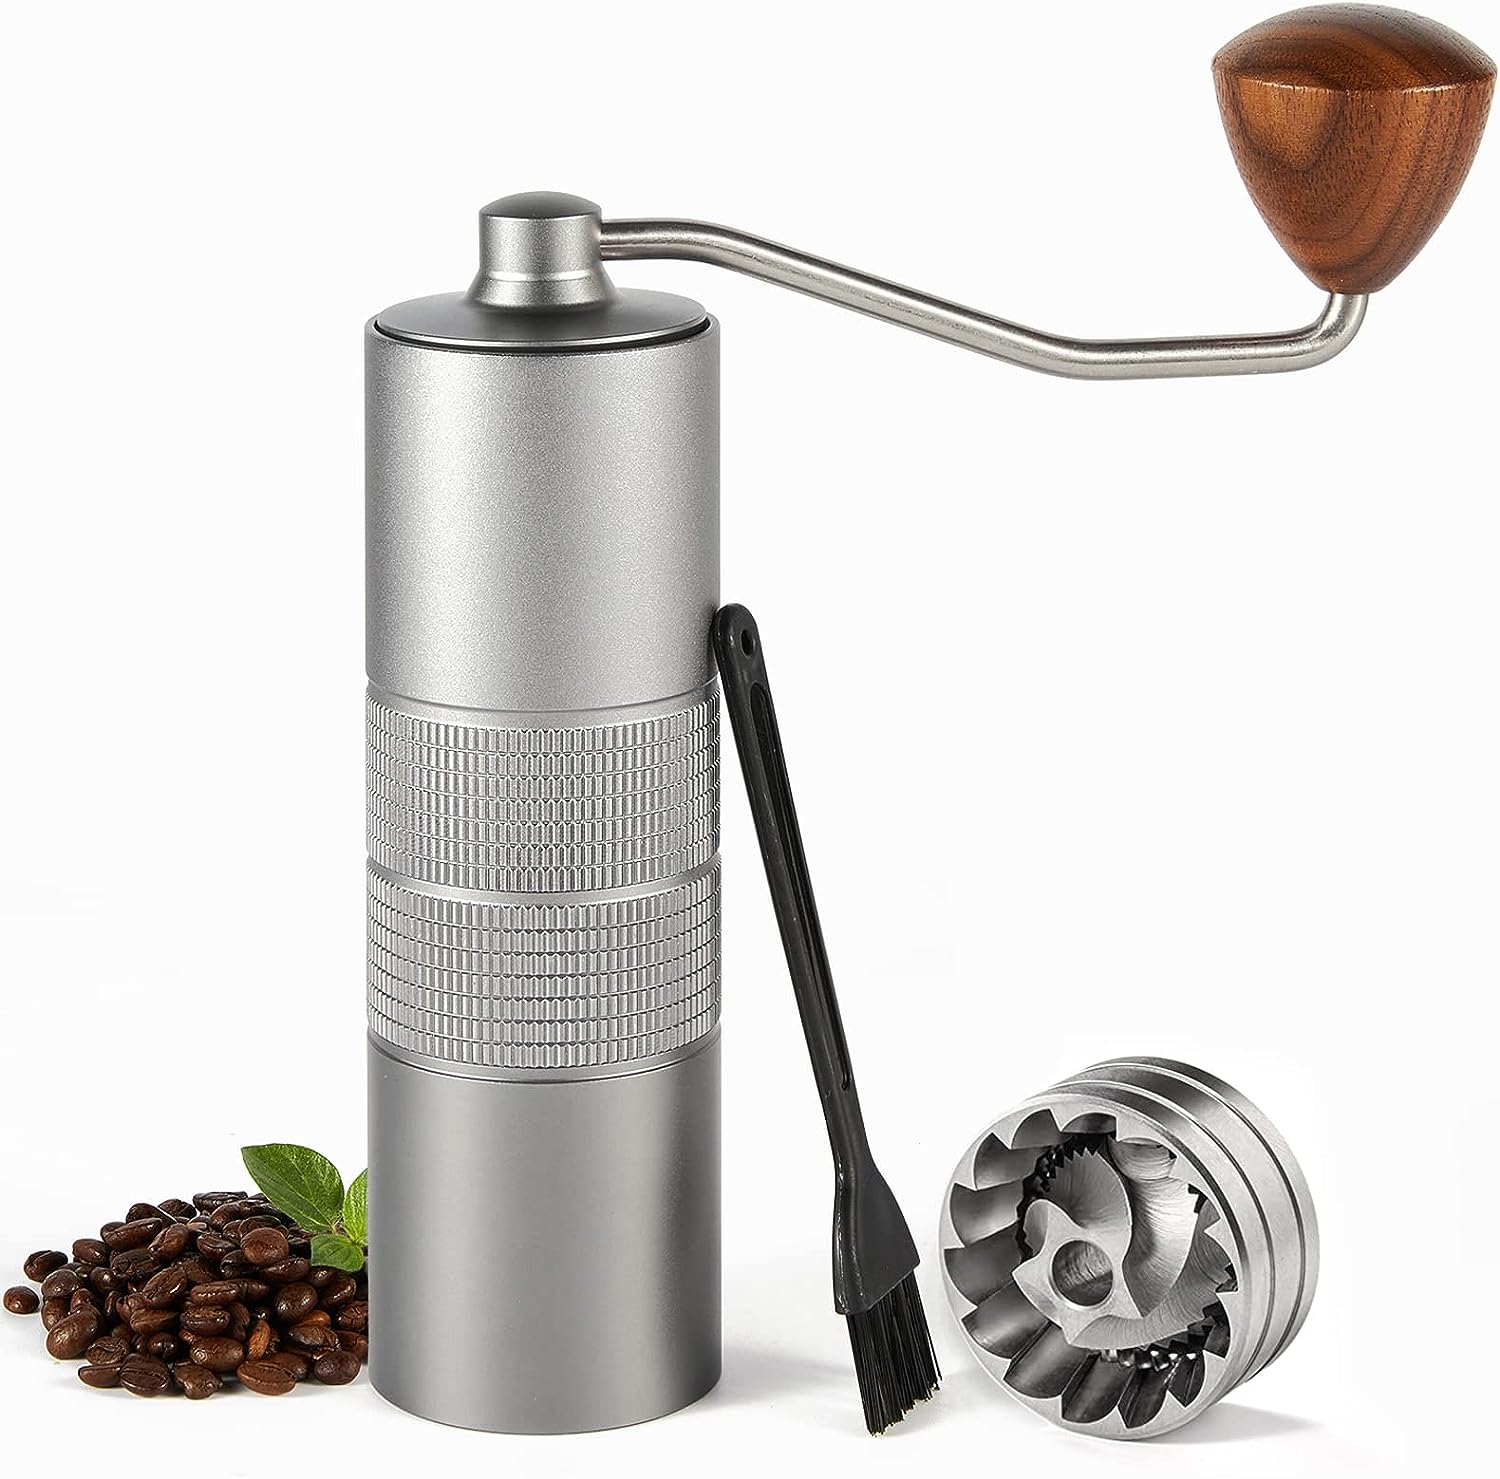 CONQUECO Coffee Grinder Manual Cone Grinder - Adjustable Grinding Level - Hand Mill Made of Stainless Steel and Cone-Shaped - Capacity Max 20 g